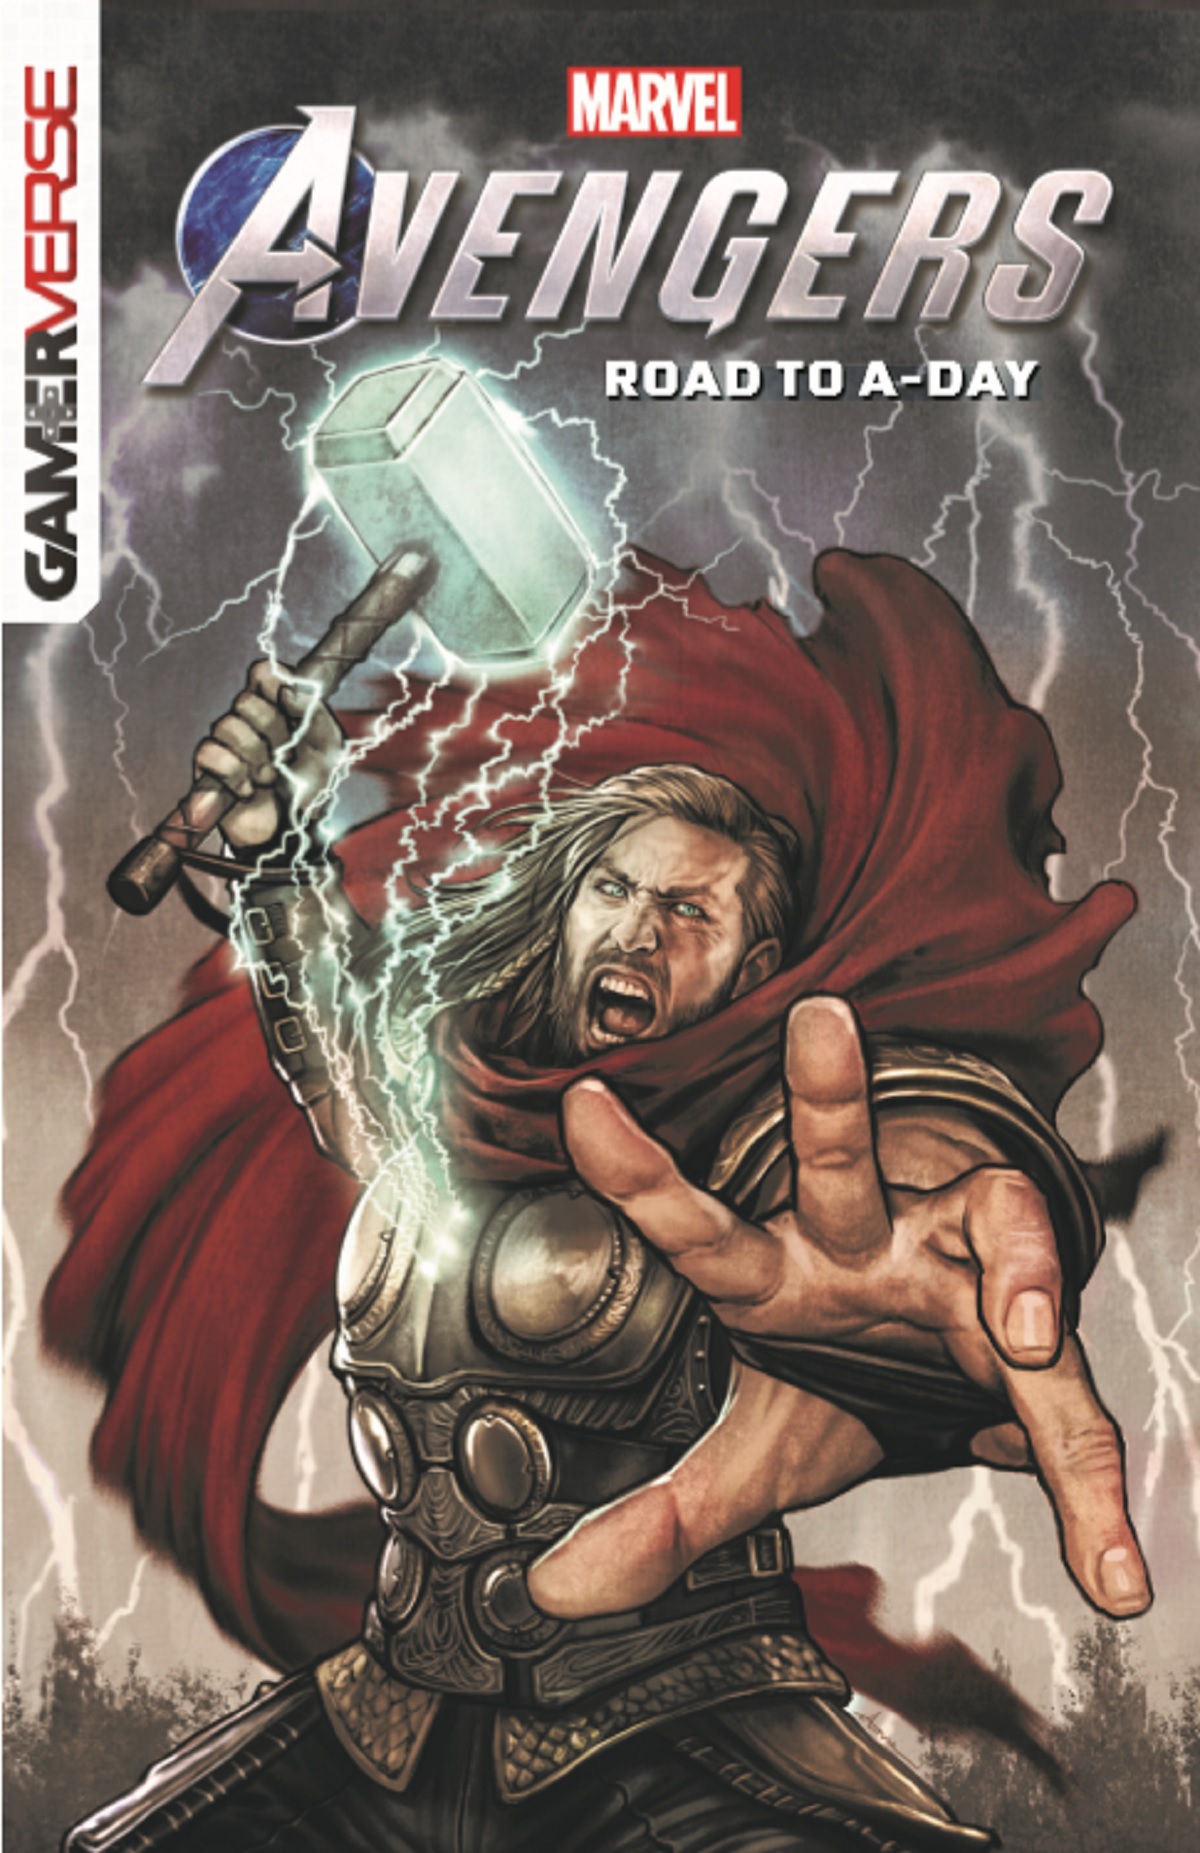 Marvel's Avengers: Road to A-Day (Trade Paperback)